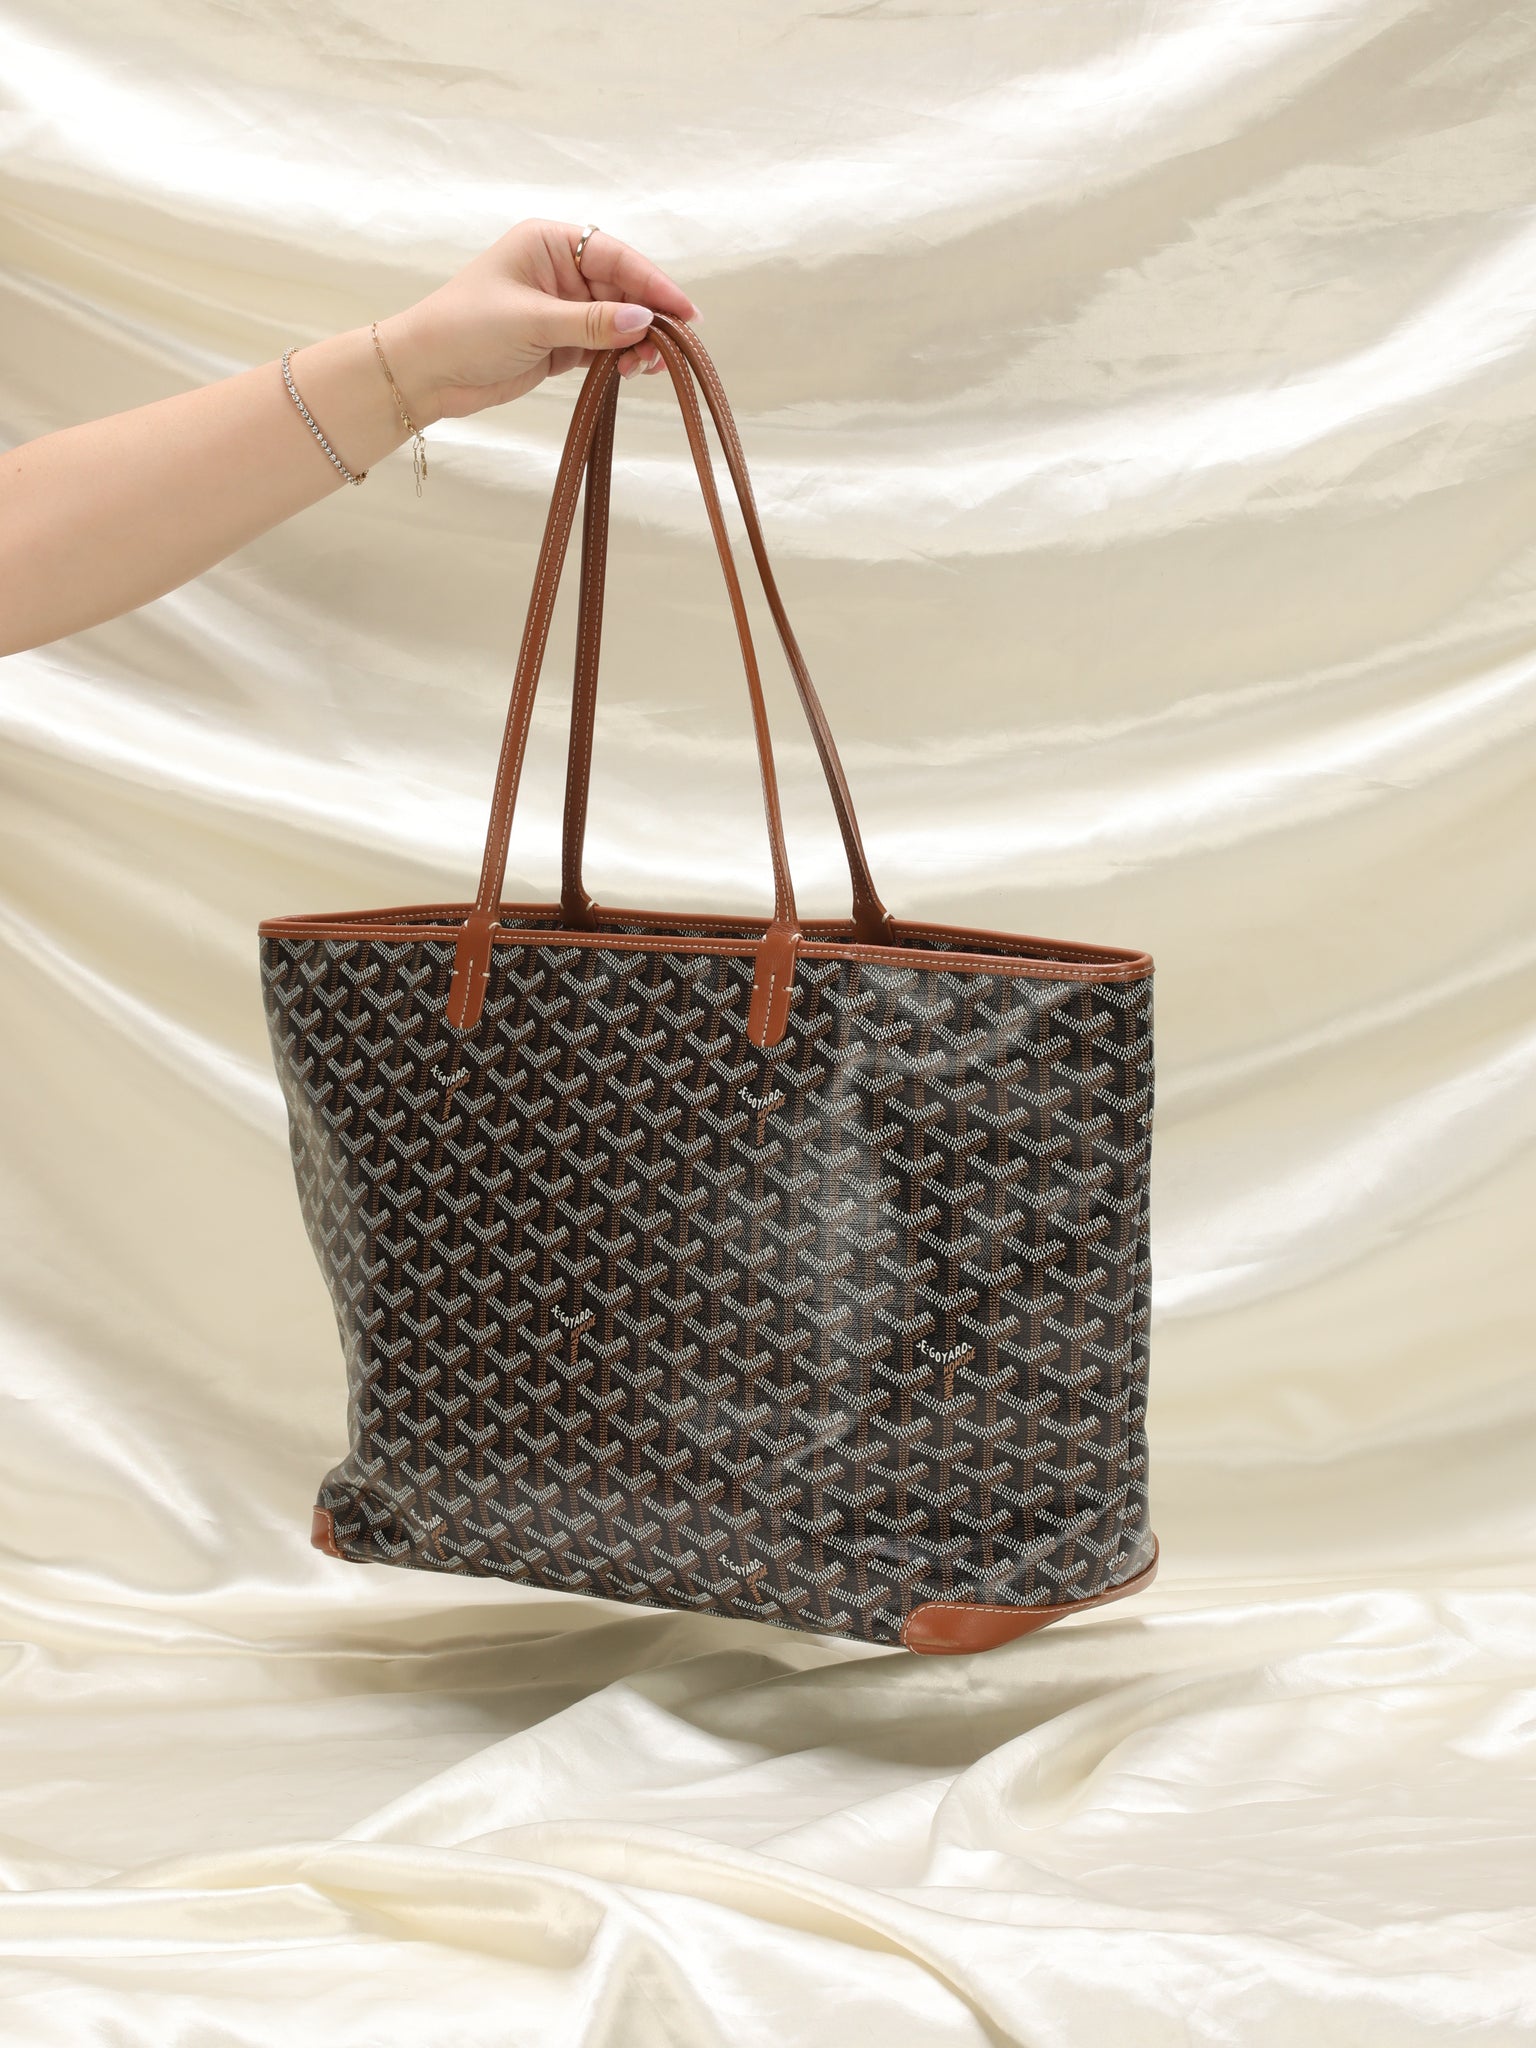 Goyard Artois MM Review and Comparison with LV Neverfull MM 